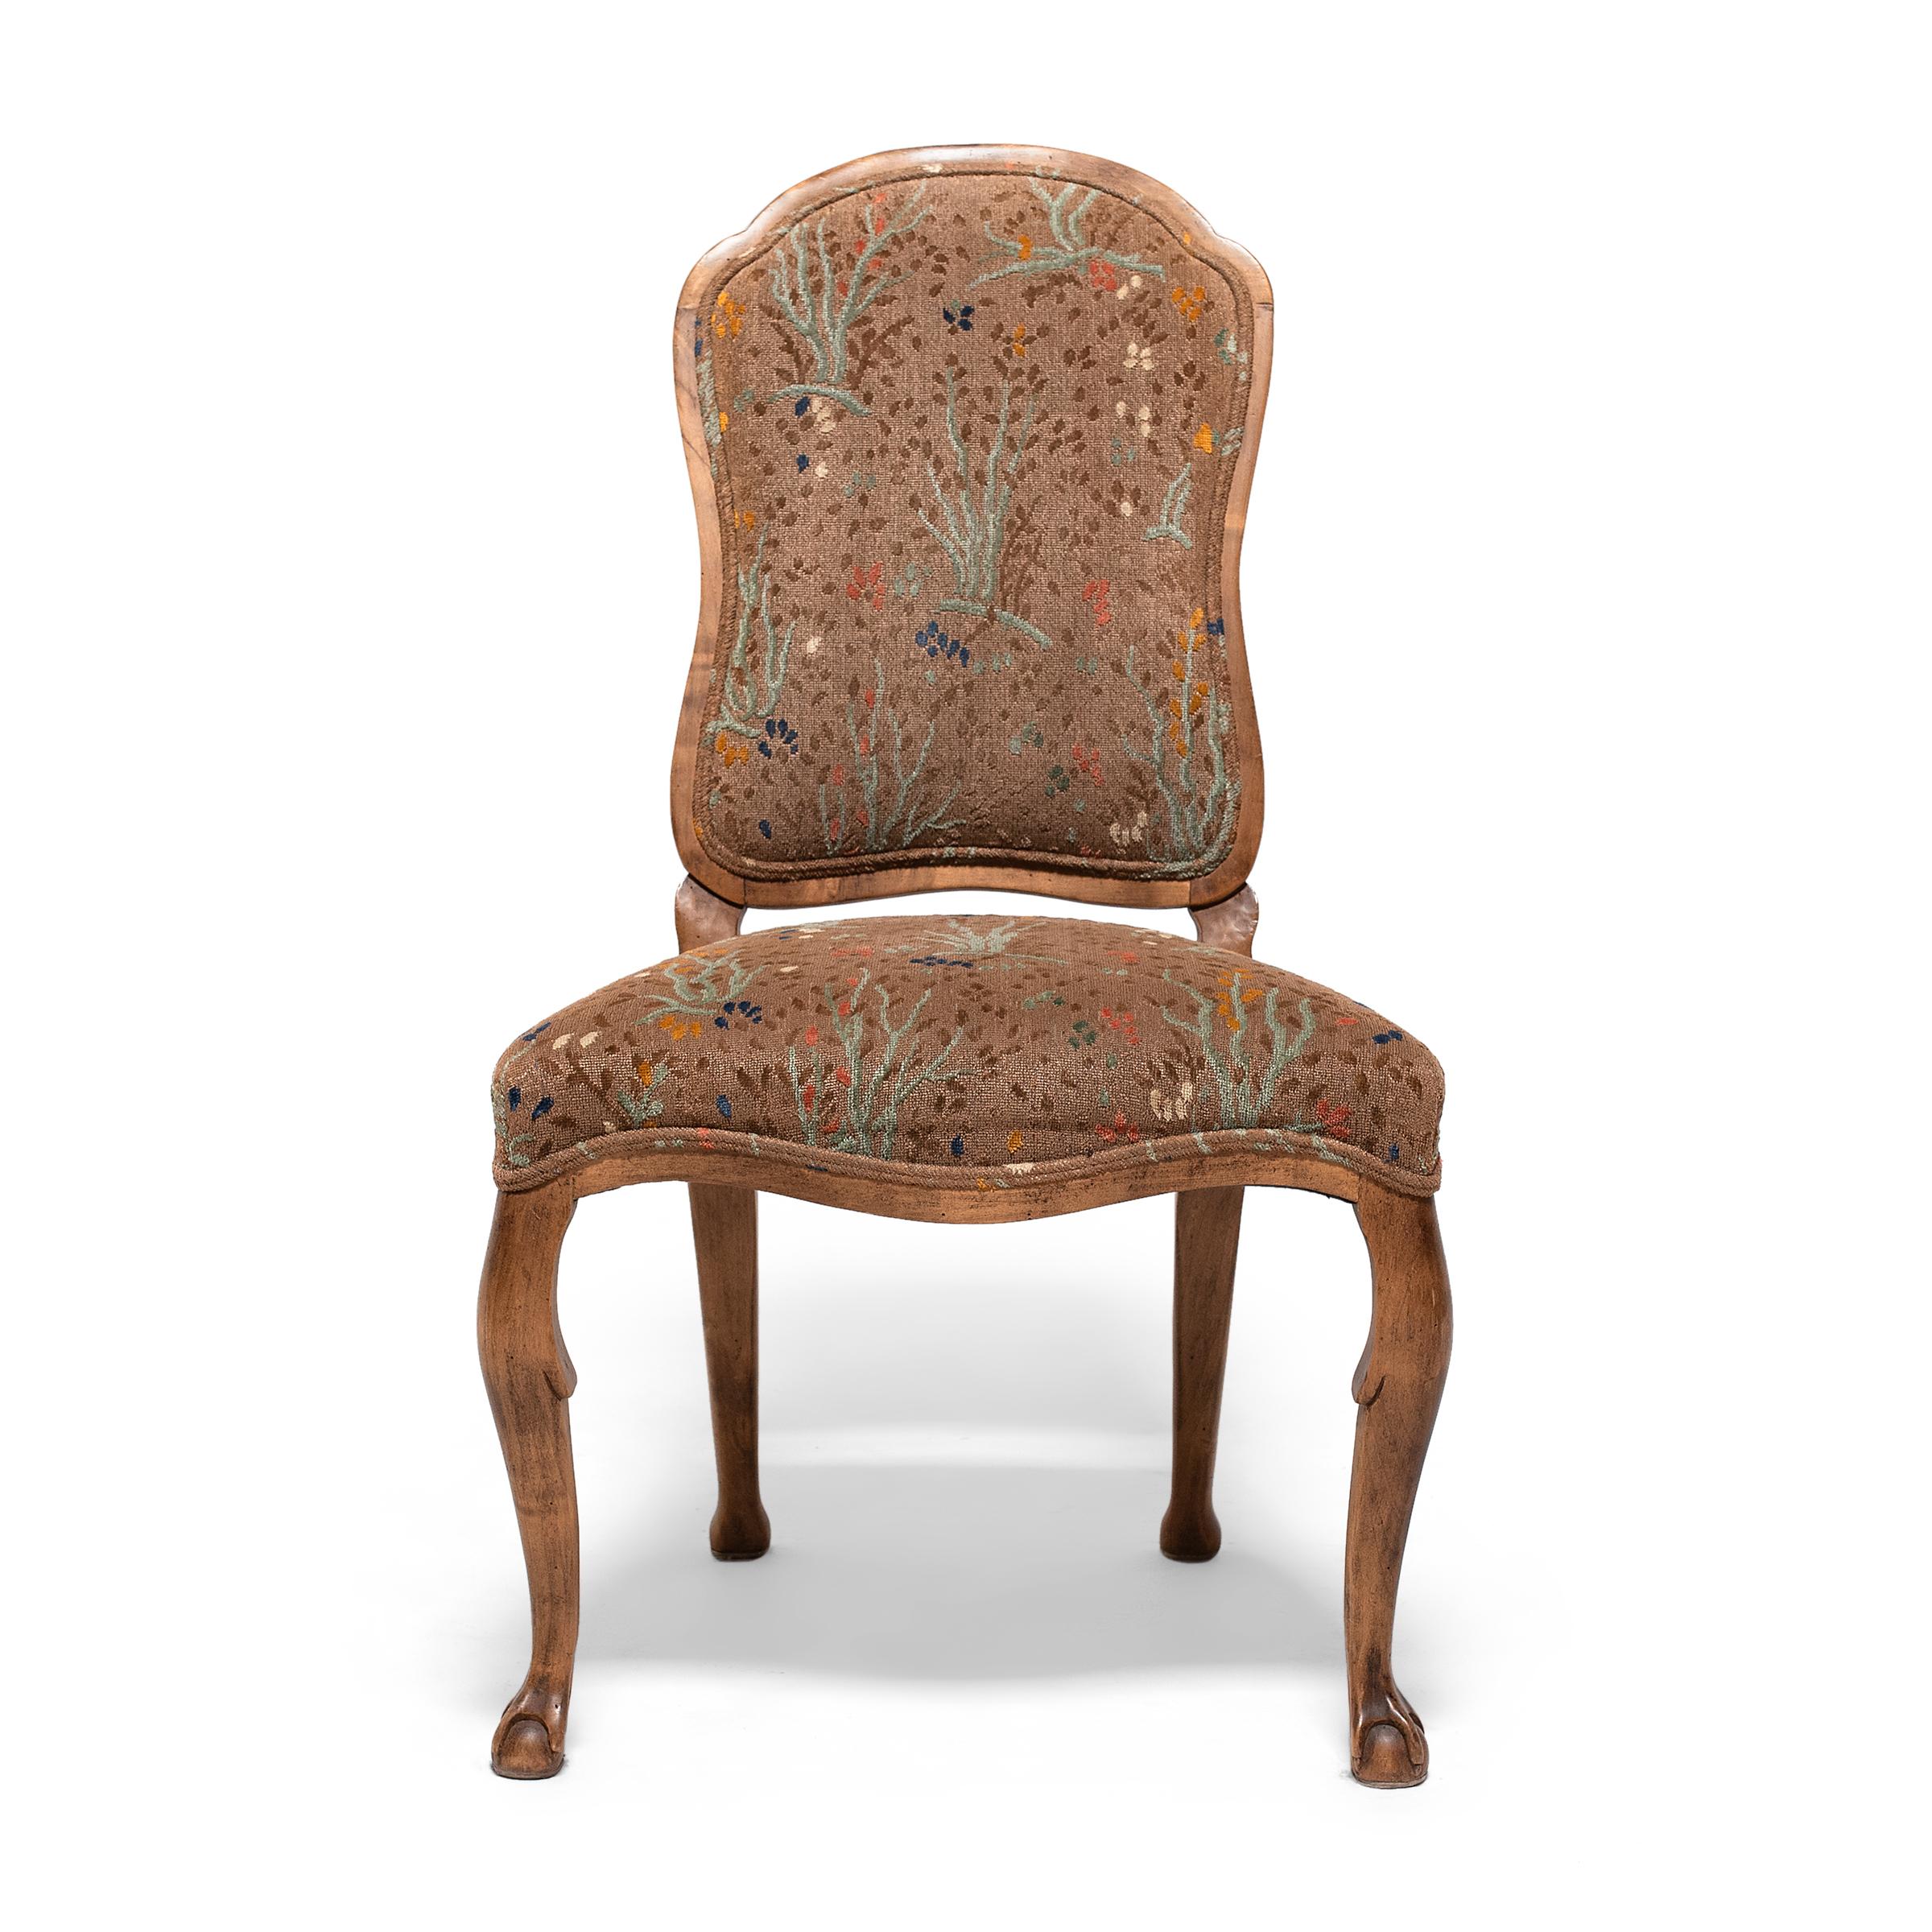 This set of four upholstered dining chairs wonderfully recreates the Louis XV style with sinuous fruitwood frames and nary a straight line in sight. Created by Minton-Spidell, this updated interpretation of the Classic Louis XV side chair is